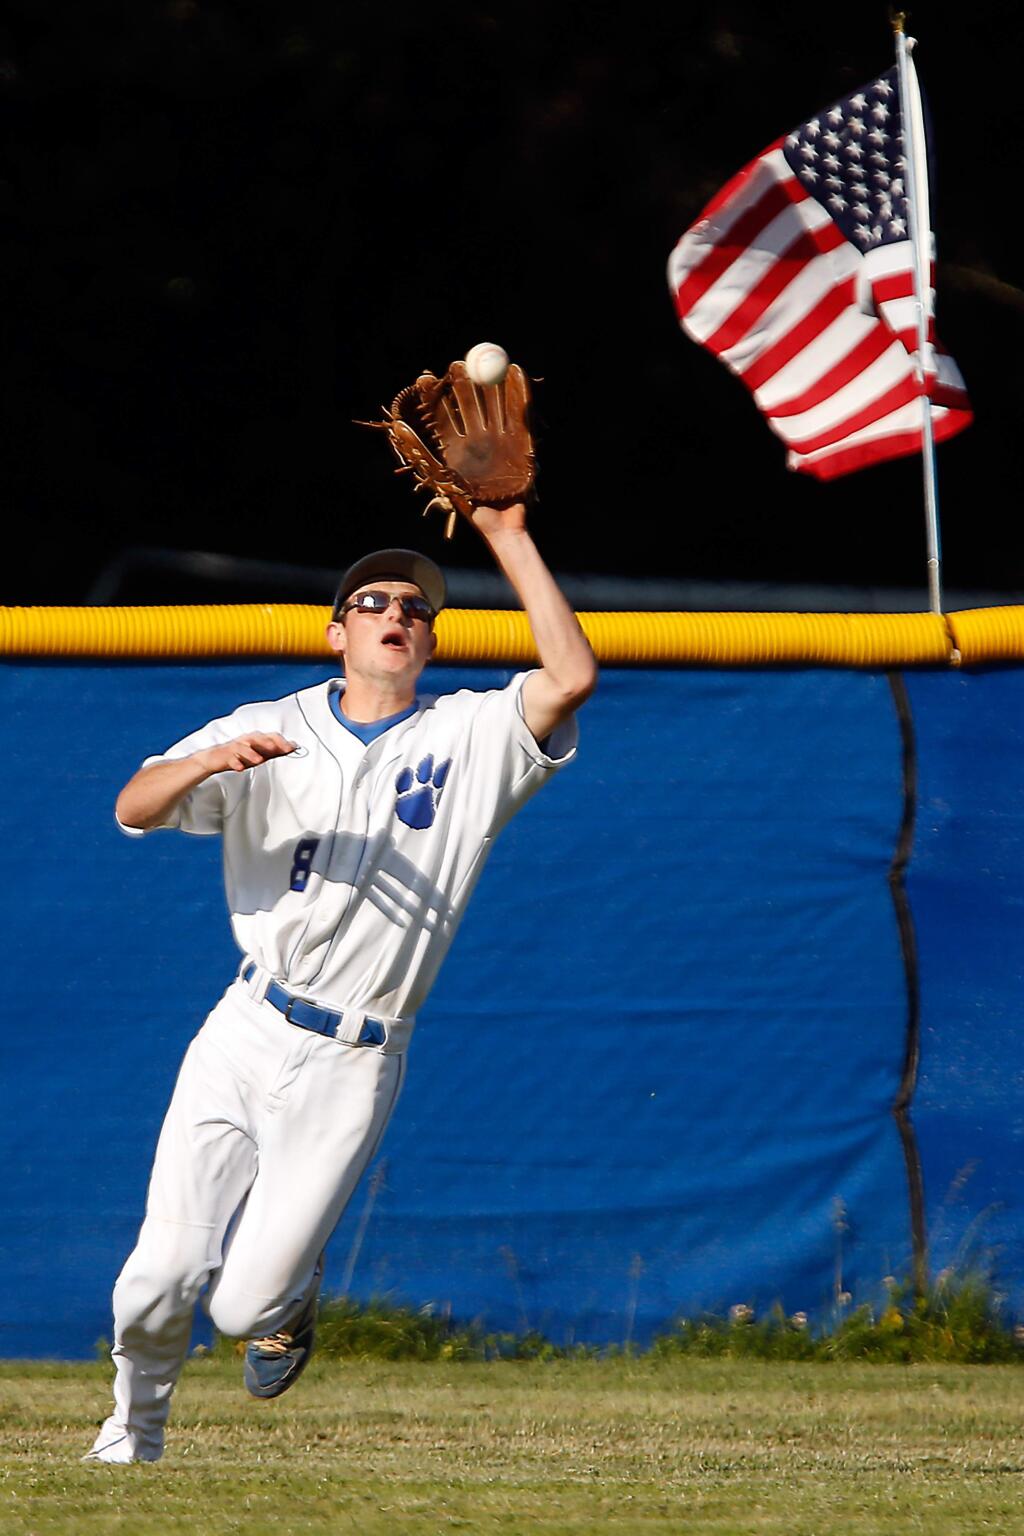 Analy centerfielder Luke Tollini (8) catches a fly ball in the third inning of the NCS playoff baseball game between Analy and San Marin high schools, in Sebastopol, California, on Tuesday, May 22, 2018. (Alvin Jornada / The Press Democrat)